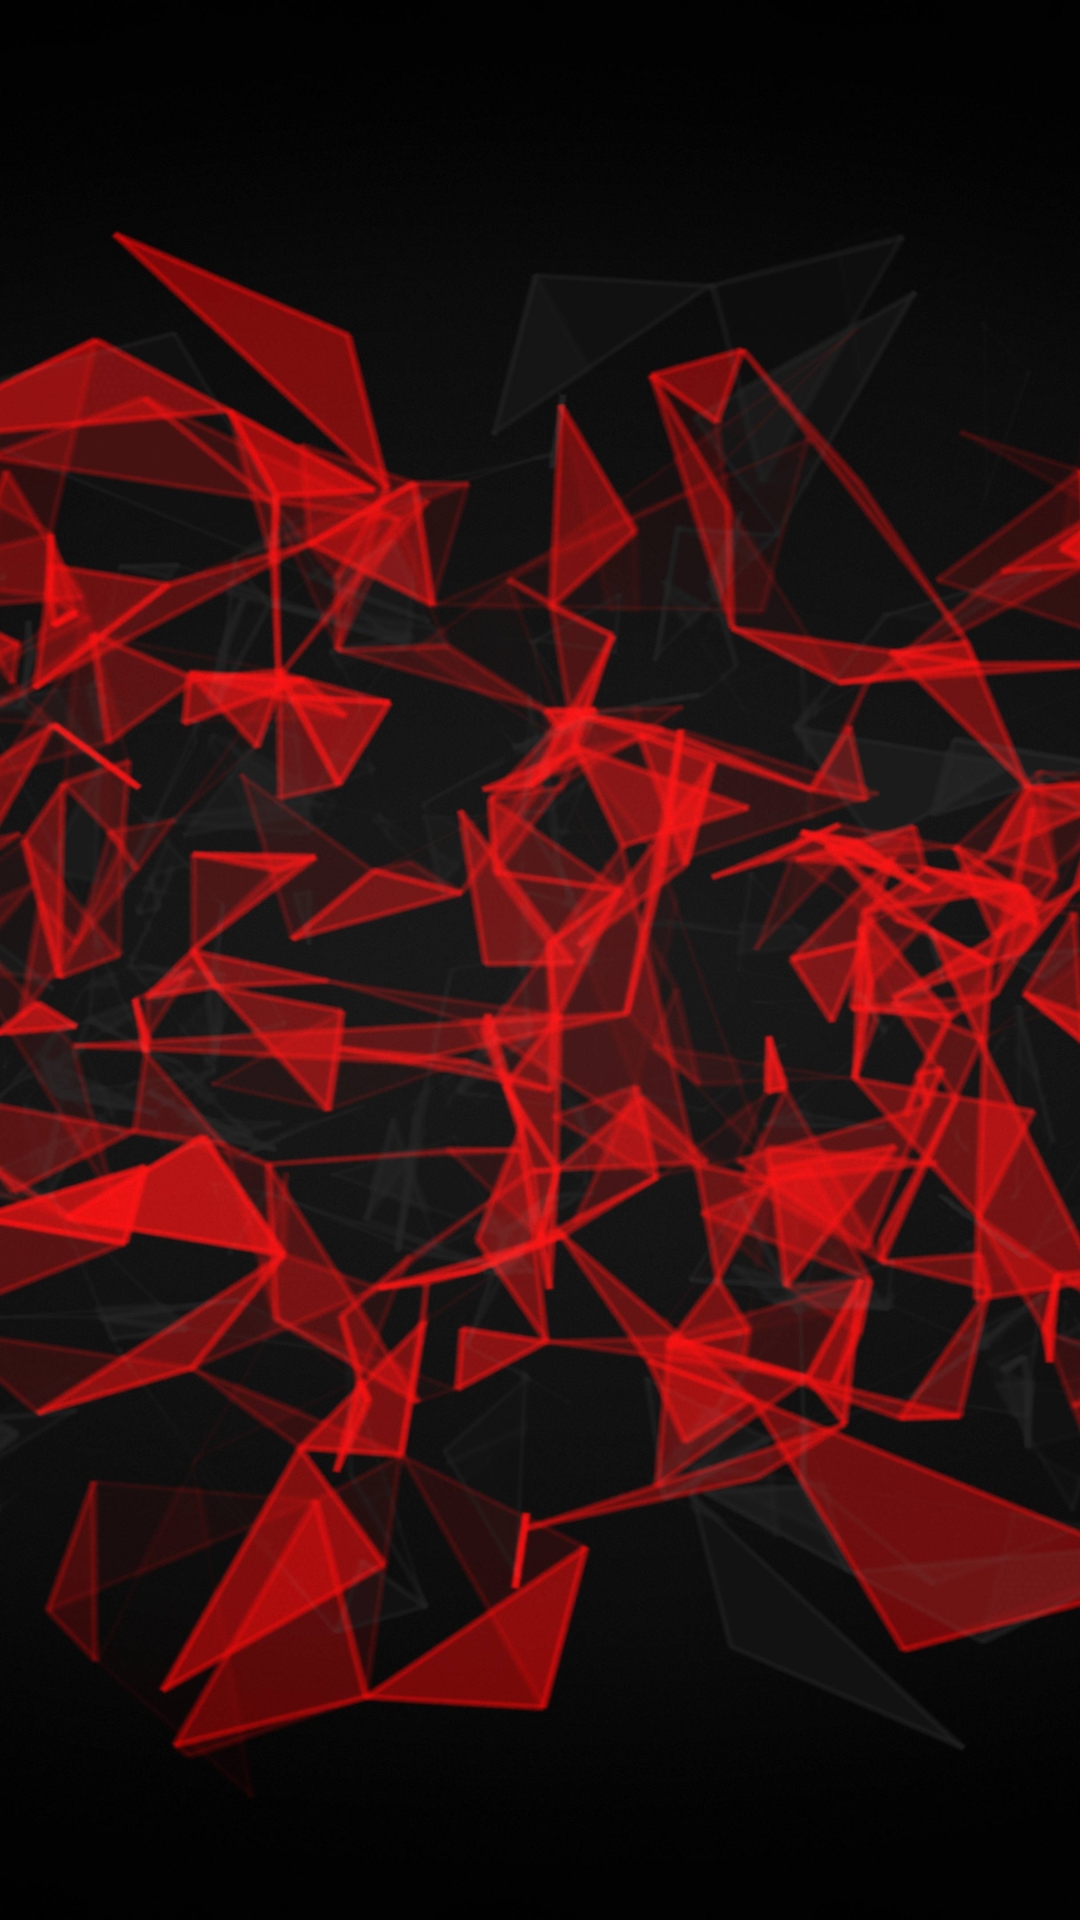 1080x1920 Resolution Red And Black Polygon Iphone 7 6s 6 Plus And